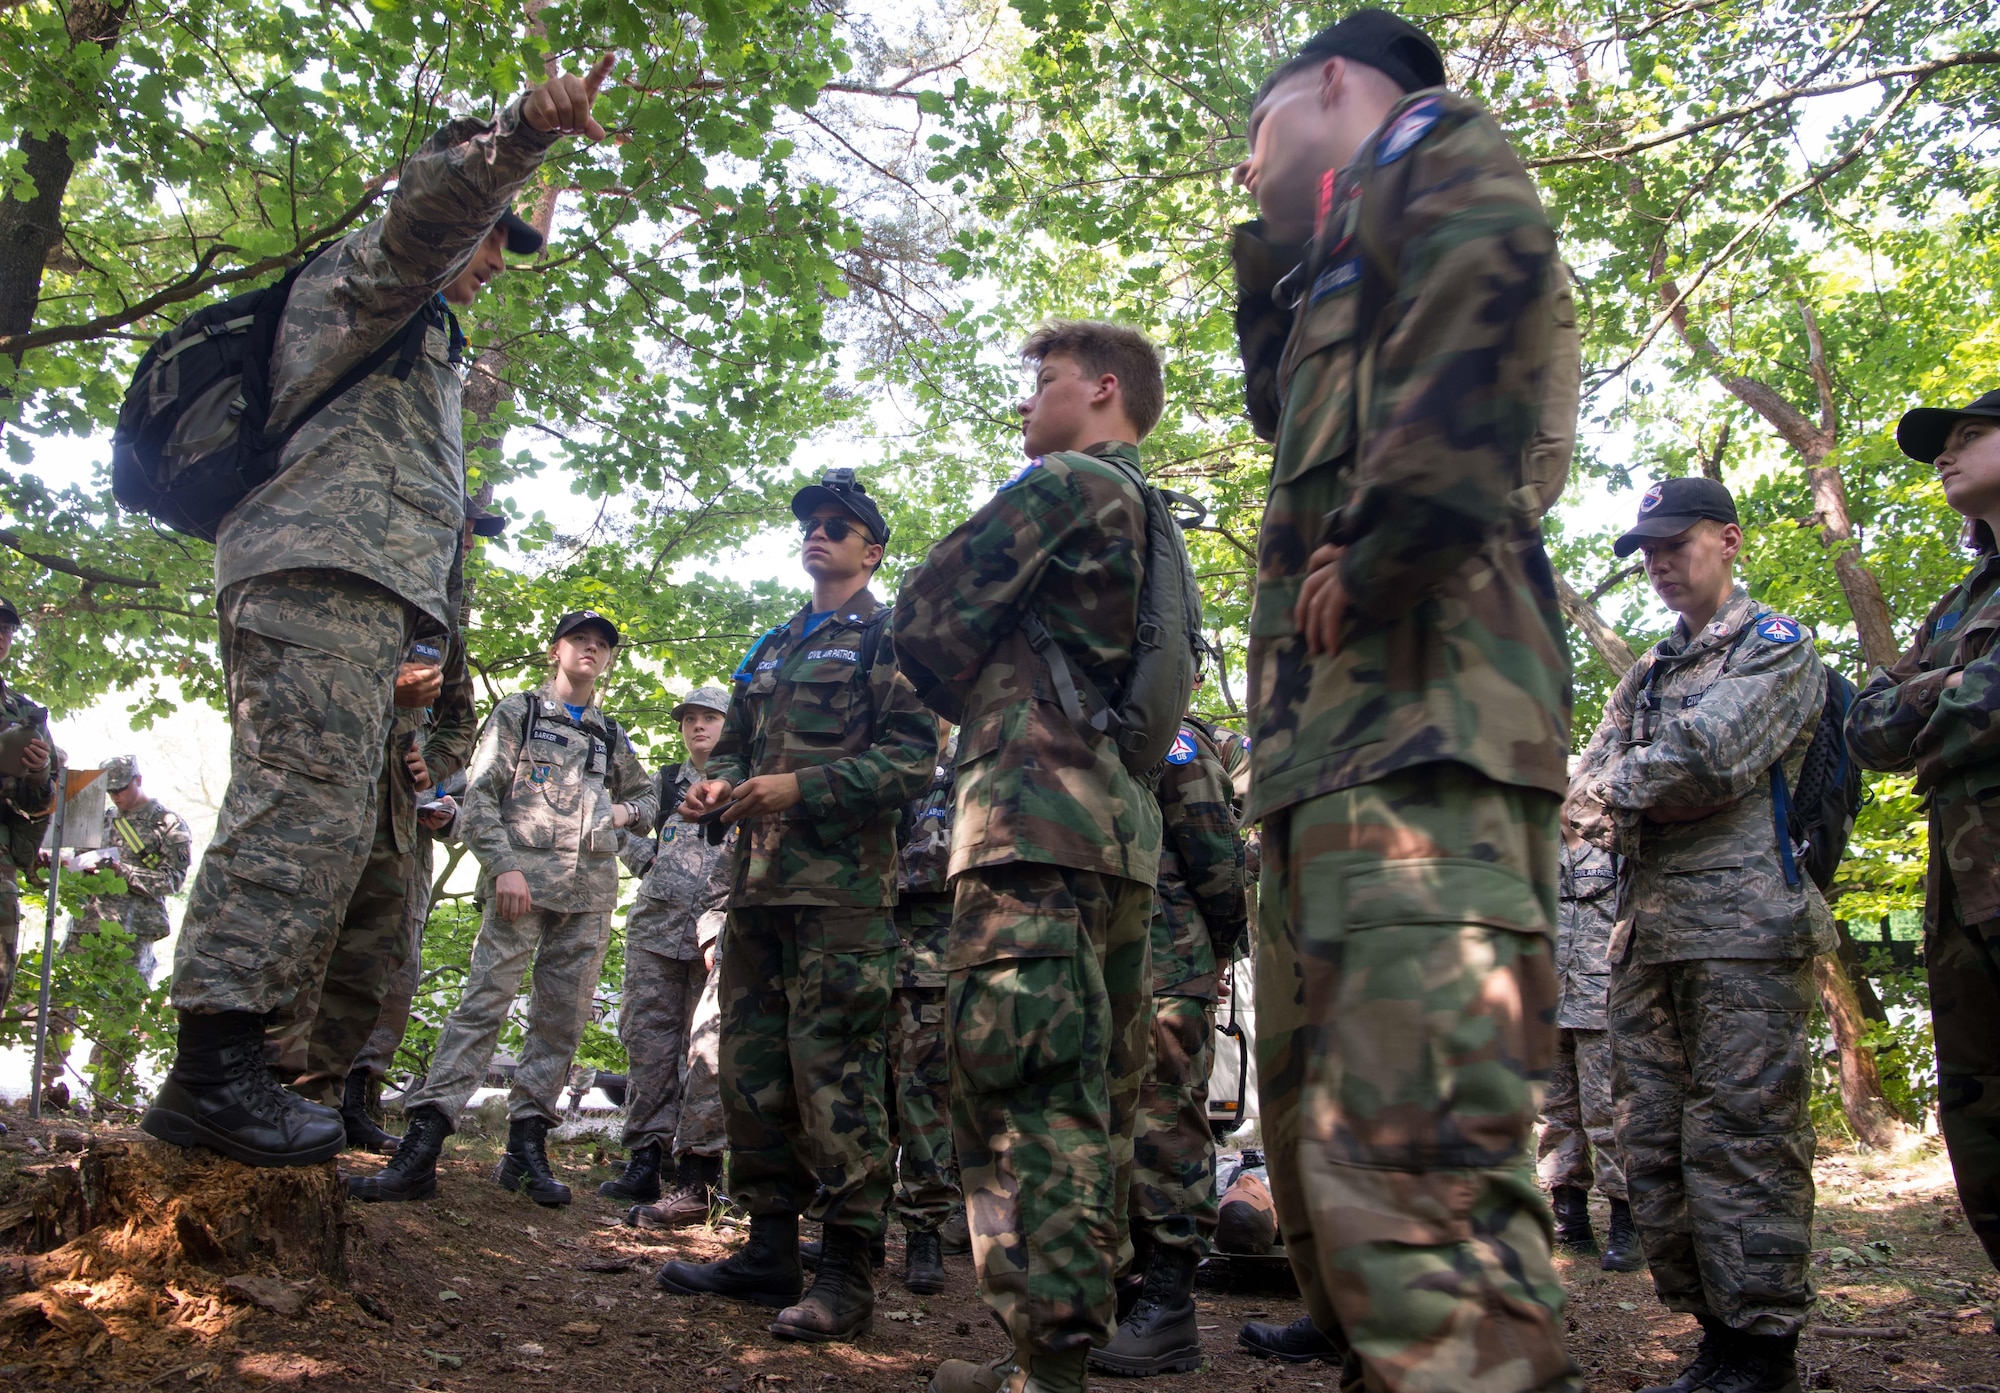 Civil Air Patrol Major Walter Brown, Royal Air Force Mildenhall Cadet Squadron deputy commander, instructs CAP European Encampment cadets on Ramstein Air Base, Germany, June 21, 2017. The cadets had many challenges to overcome from learning proper dress, drill and ceremony to figuring out how to communicate as they carried out challenges like the woodland obstacle course. These challenges are designed to transform American youth into leaders and build knowledge of aerospace throughout the U.S. population. (U.S. Air Force photo by Senior Airman Elizabeth Baker)